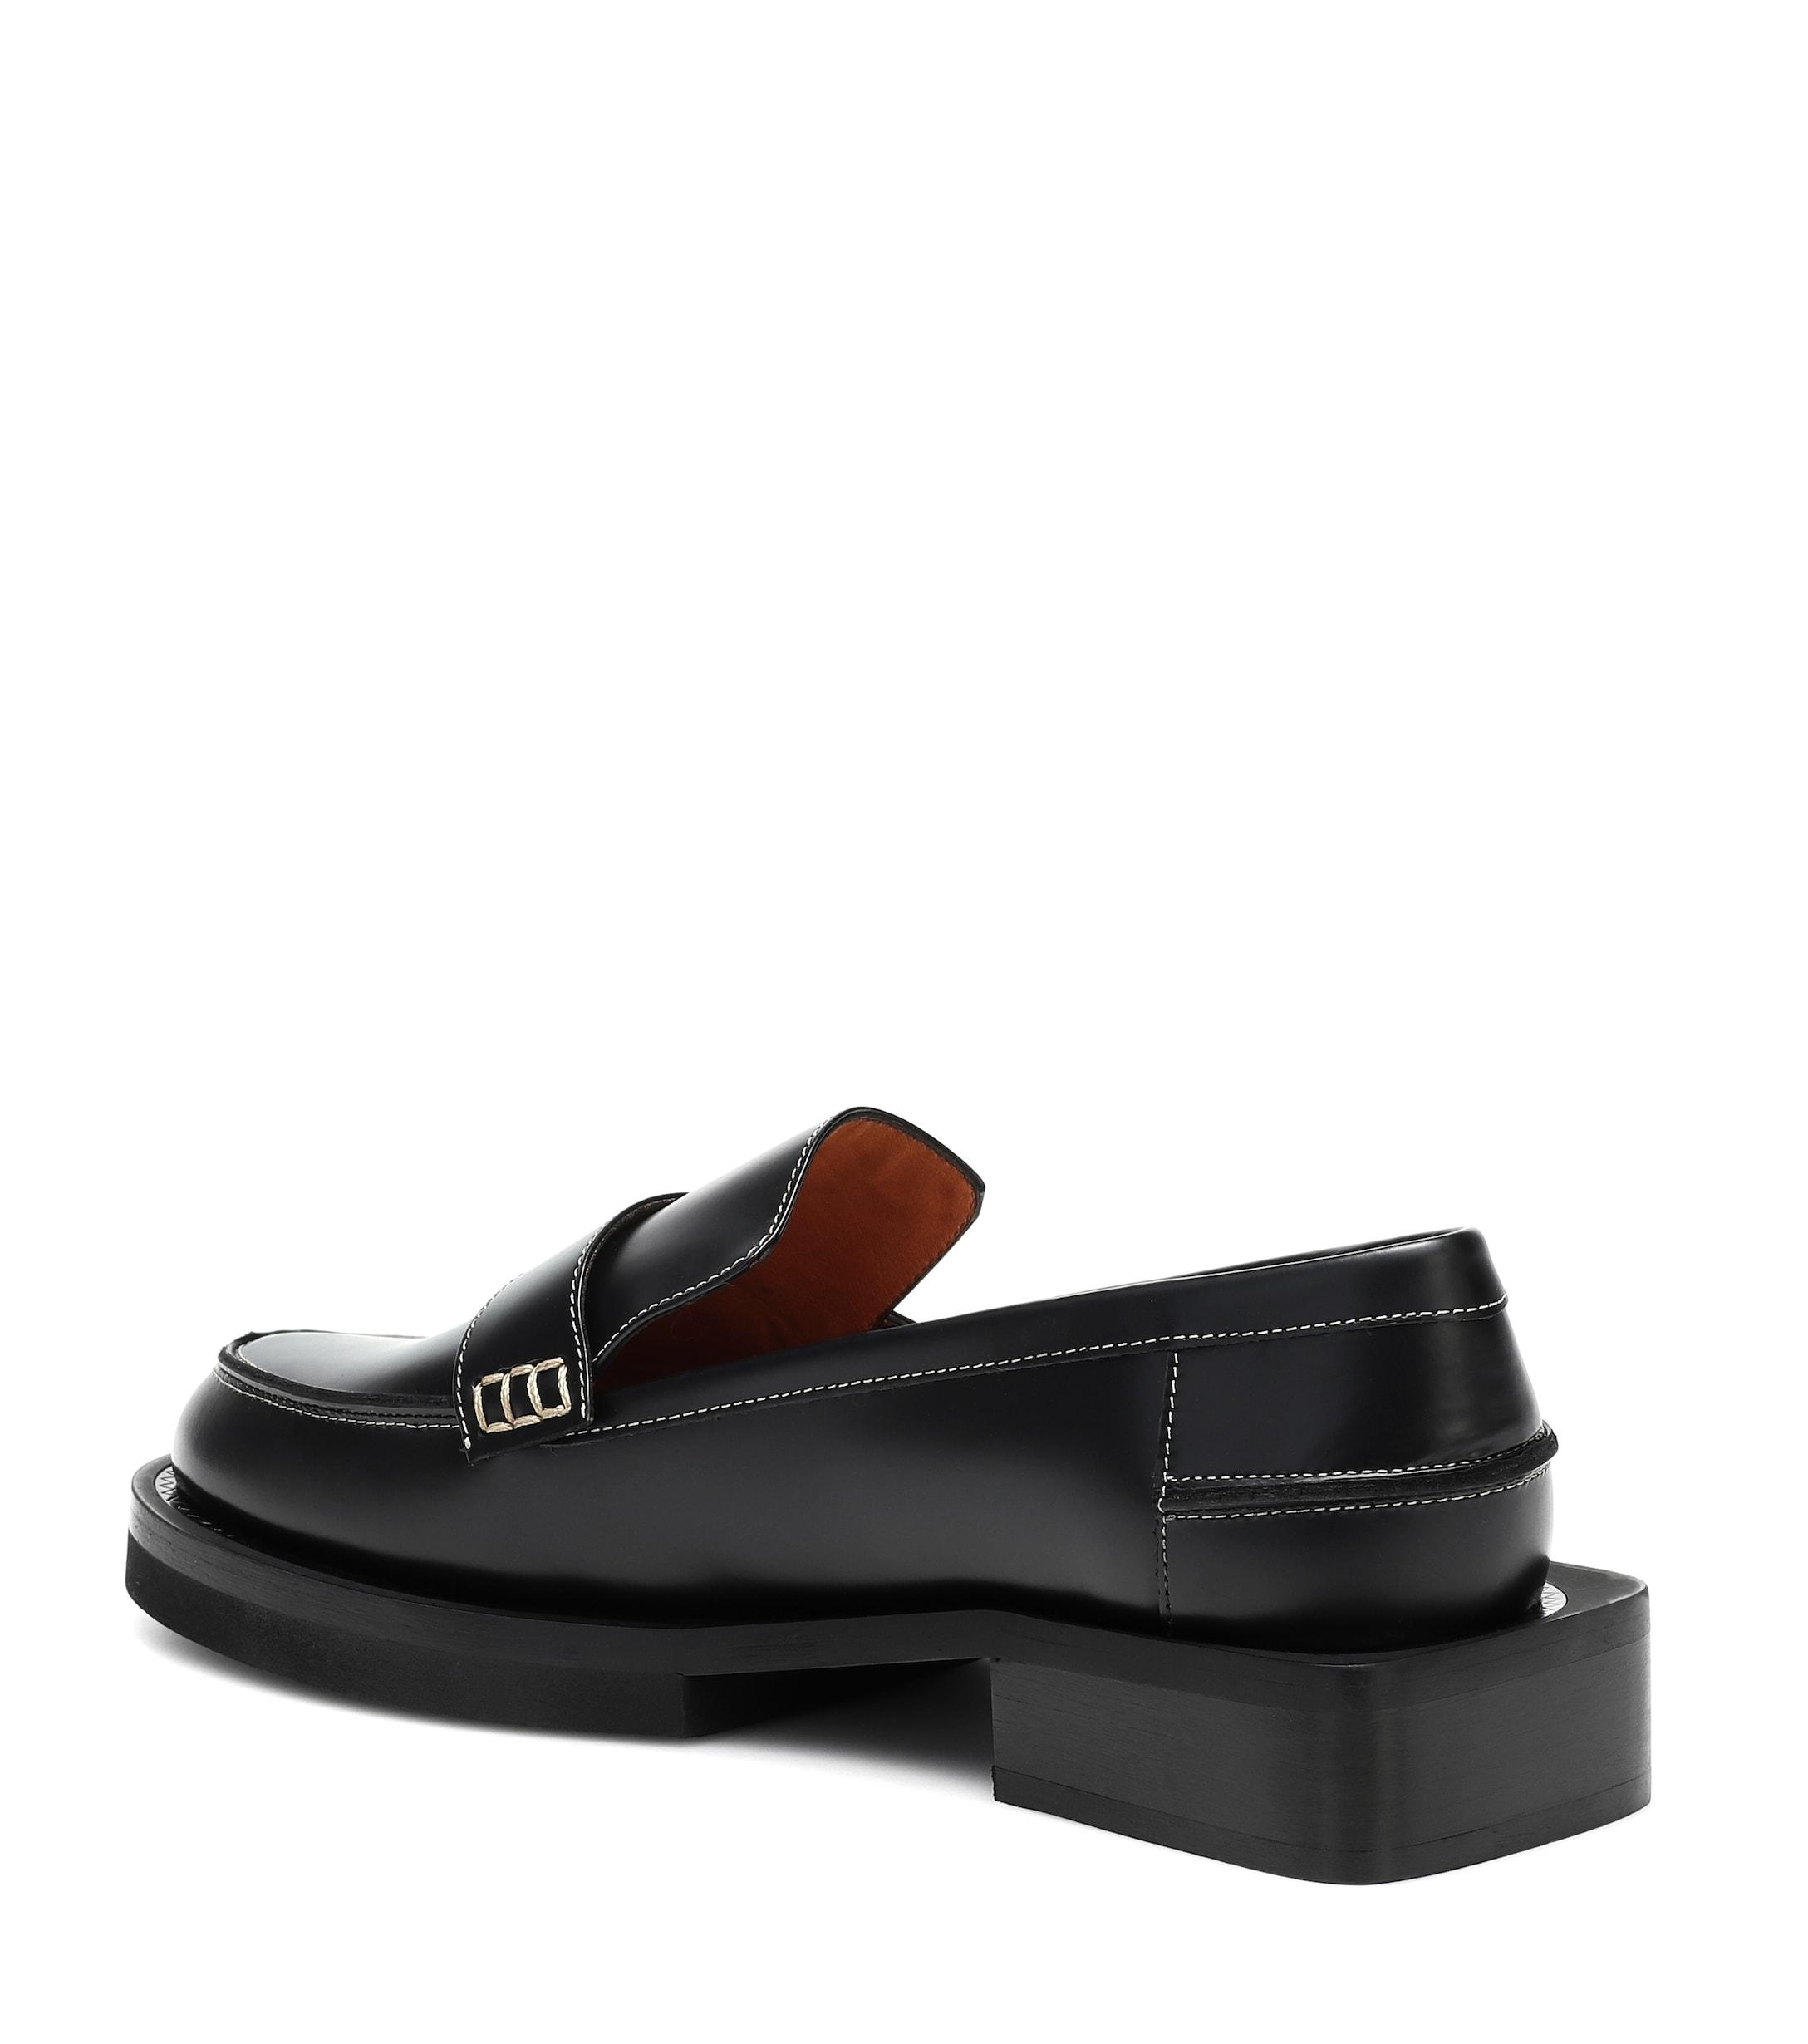 Ganni Jewel Leather Loafers in Black - Lyst